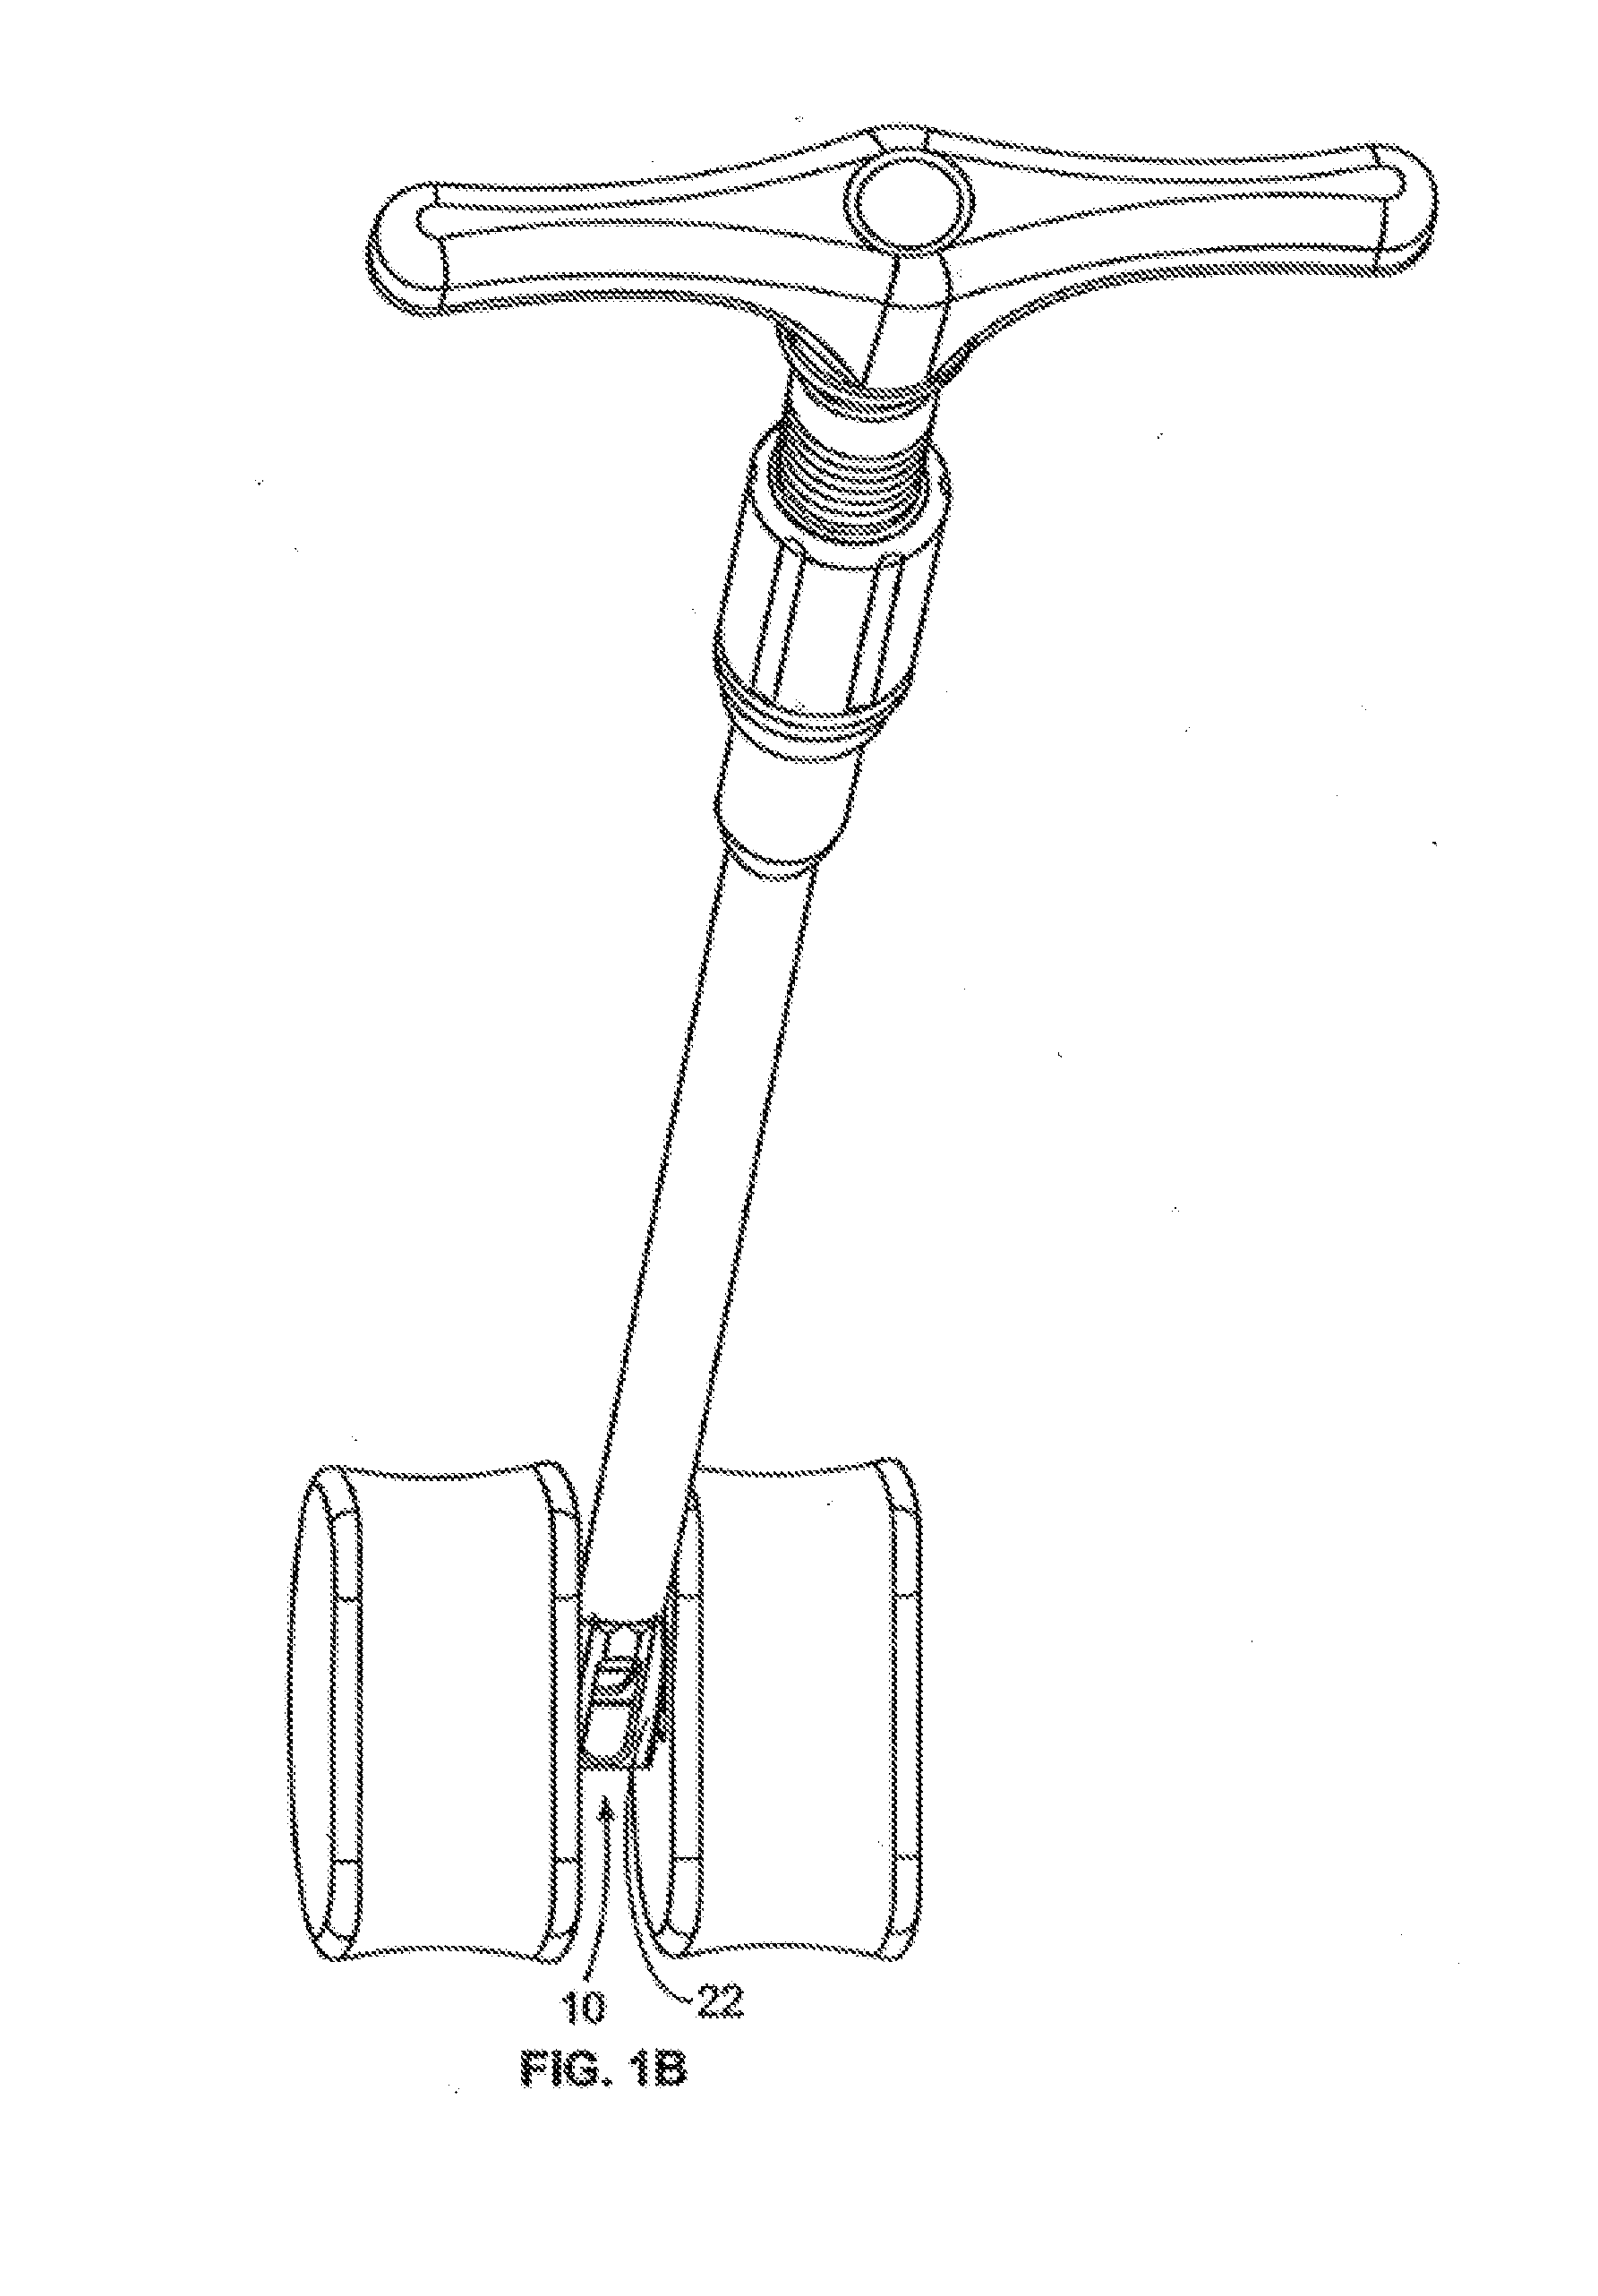 Methods and Systems for Interbody Implant and Bone Graft Delivery